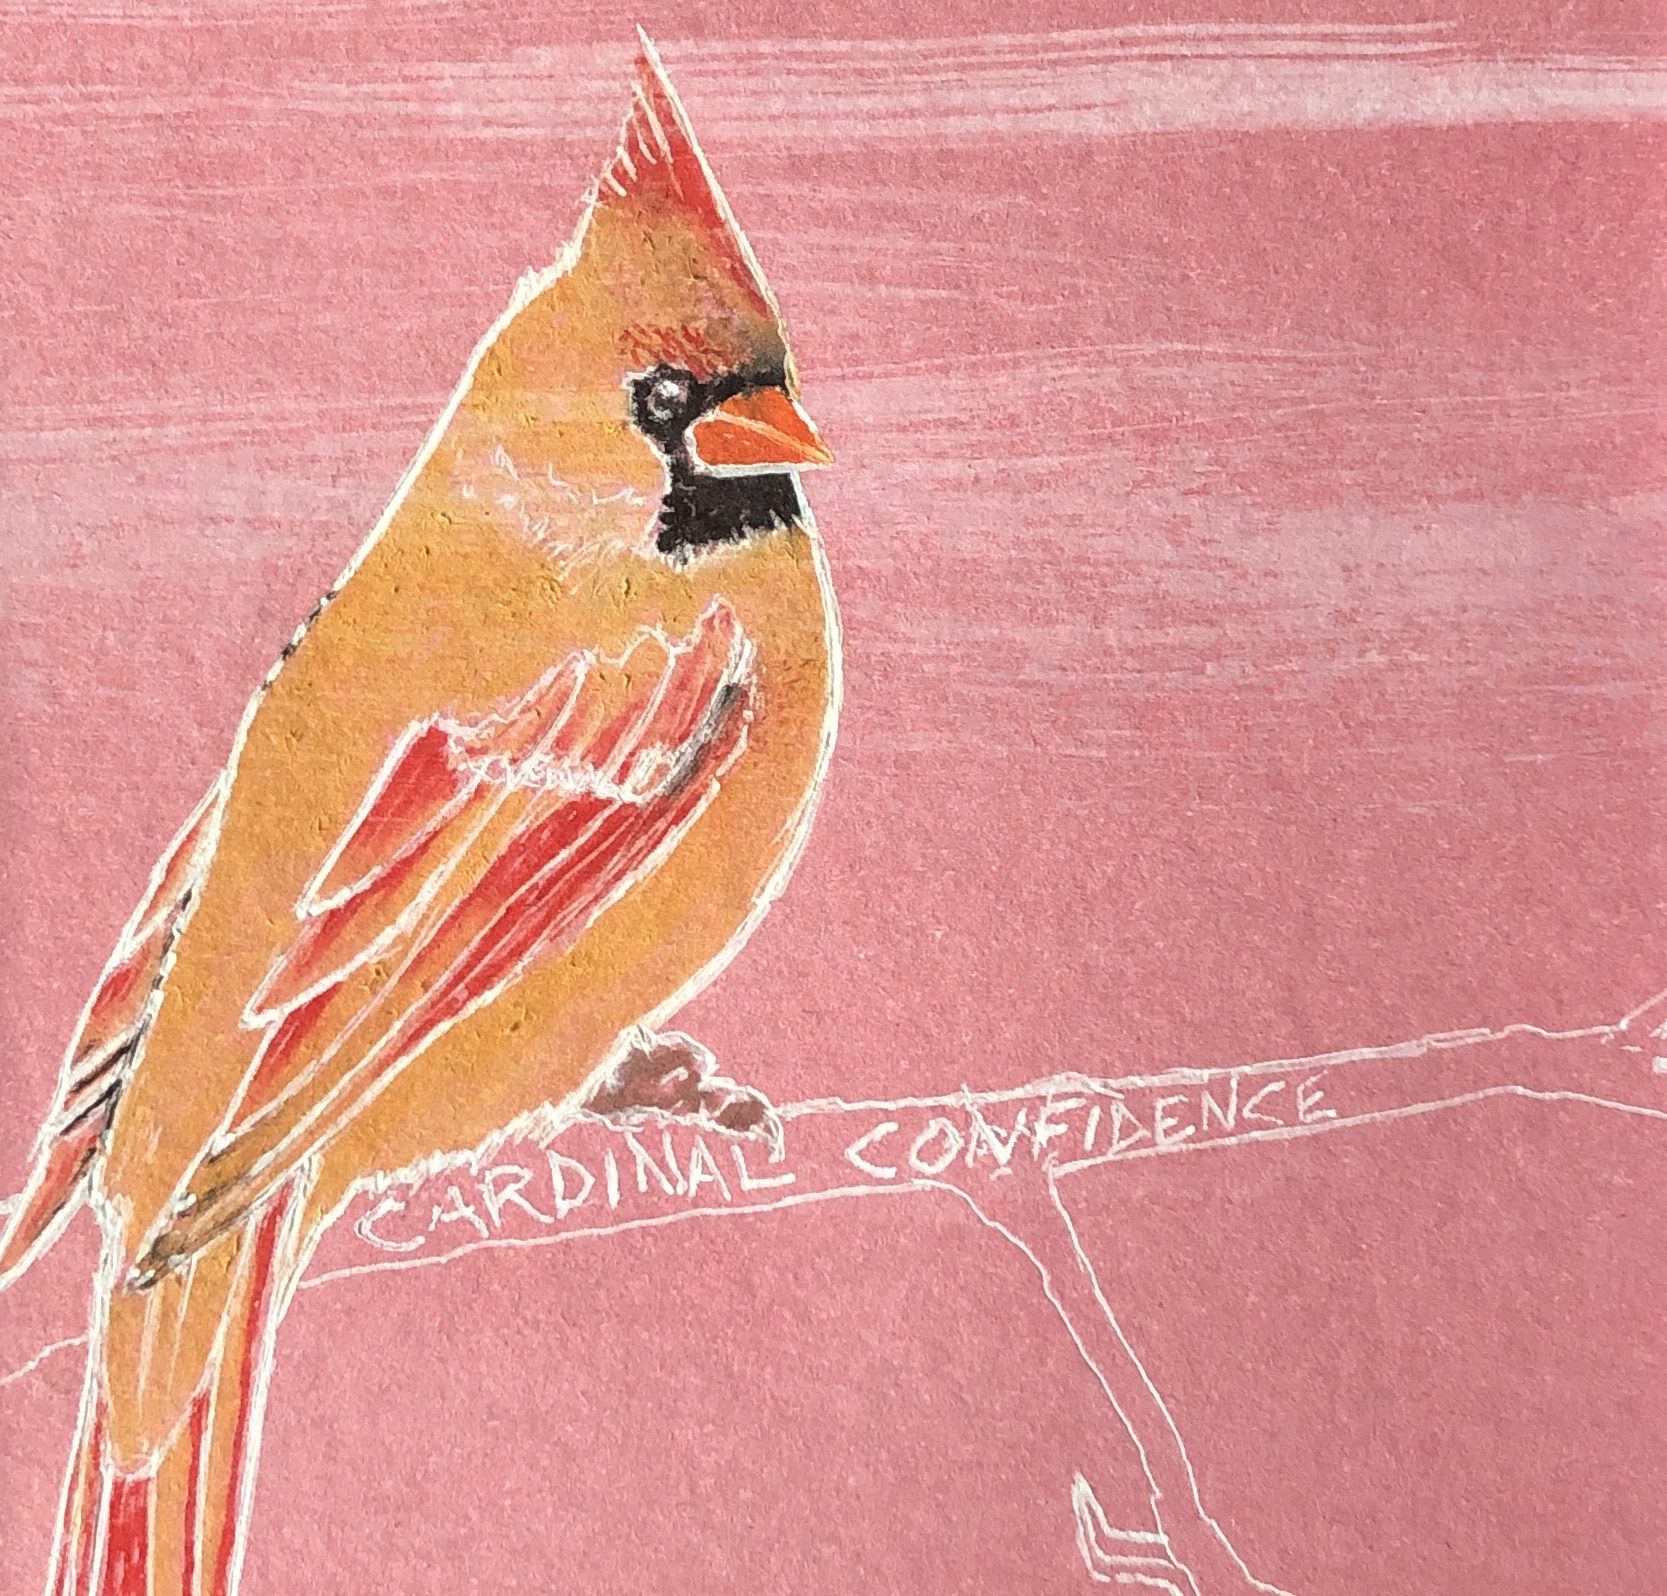 Cardinal Confidence: A Passion Project